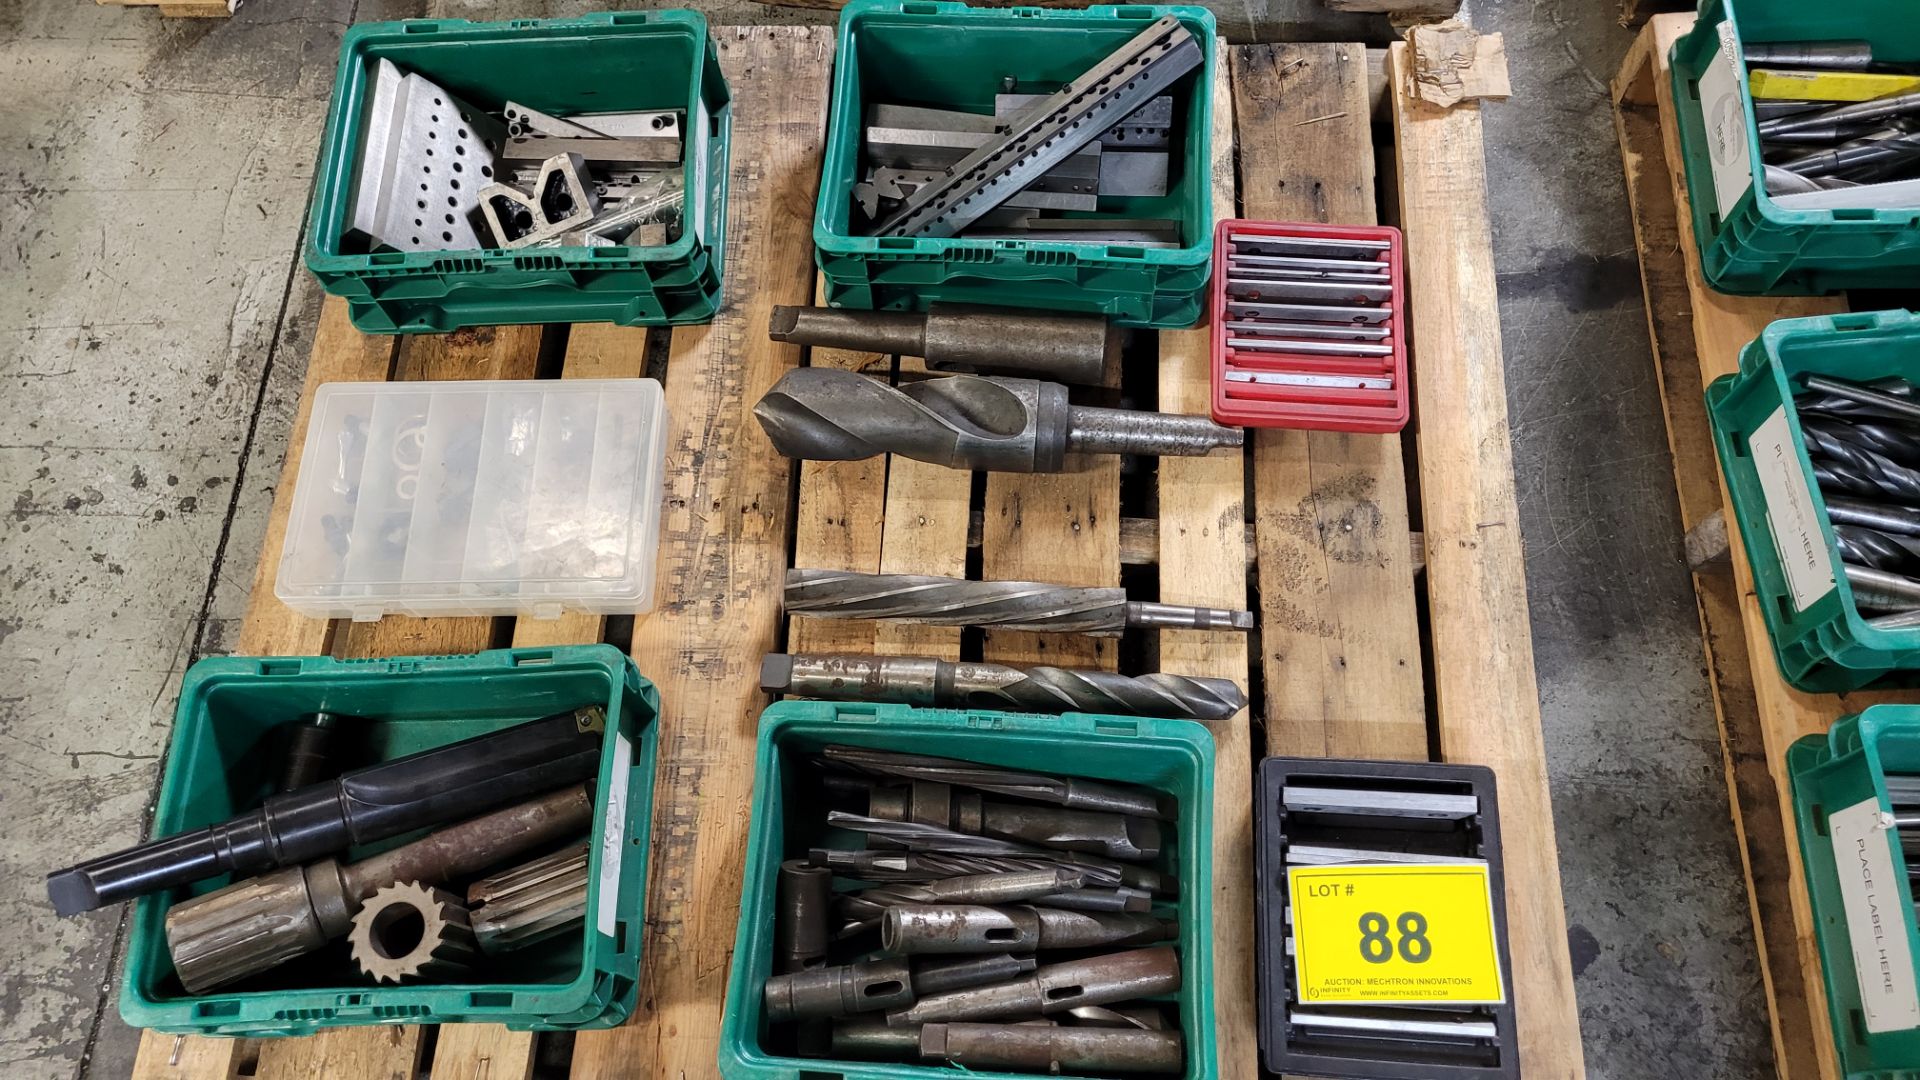 LOT OF ASST. DRILL BITS, REAMERS, SLEEVES, PARALLELS, SETUP BLOCKS, ETC.